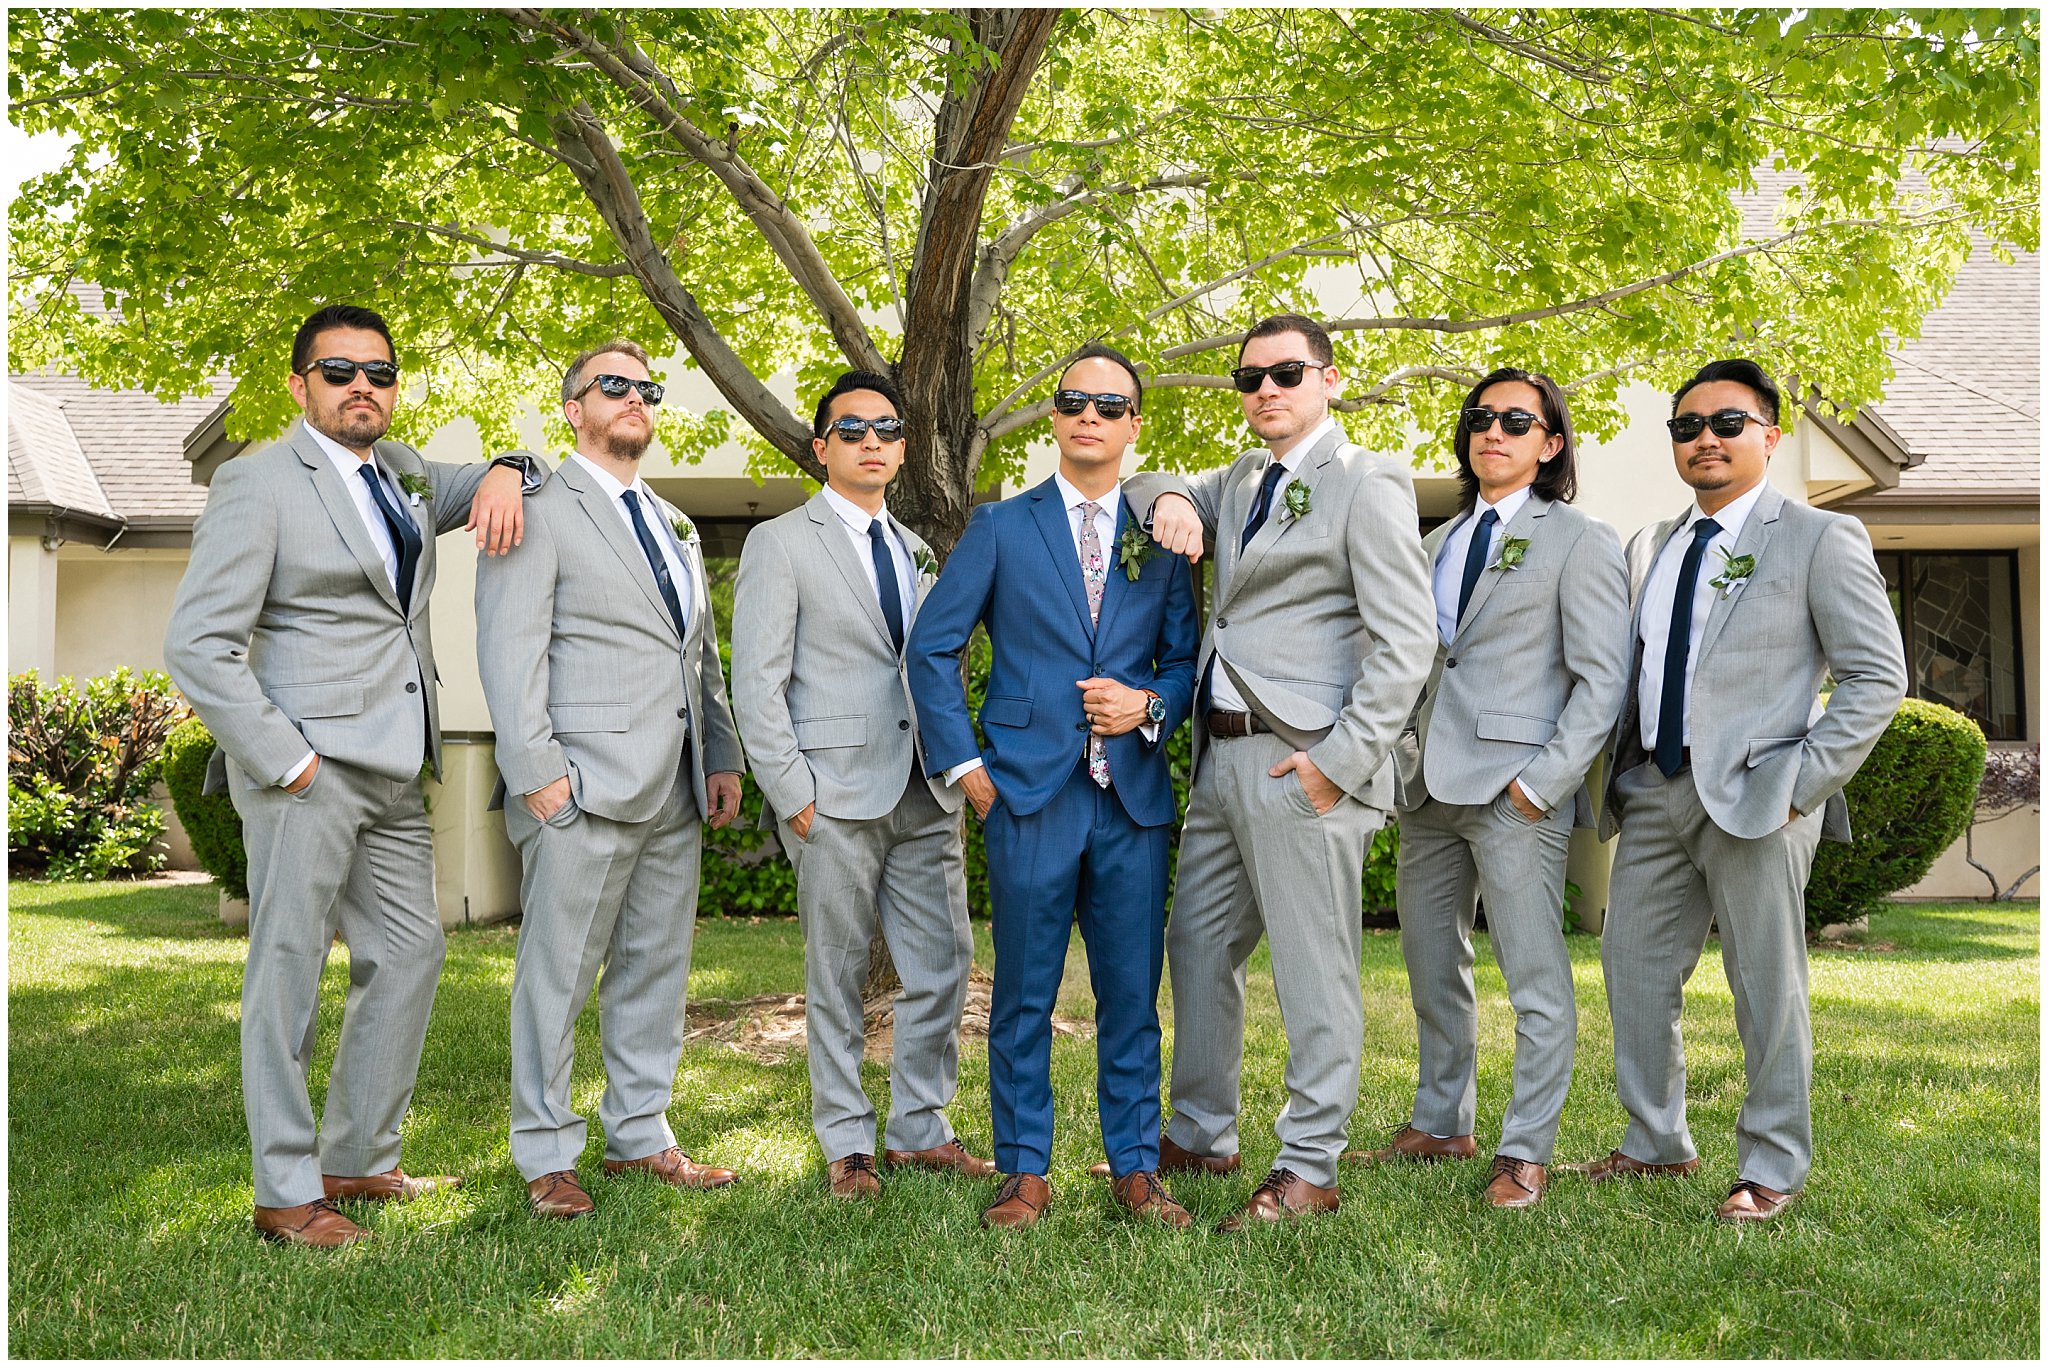 Wedding party portraits with groomsmen in blue and grey suits and bridesmaids in pink dresses | Cactus and Tropicals and Salt Lake Church Wedding | Jessie and Dallin Photography